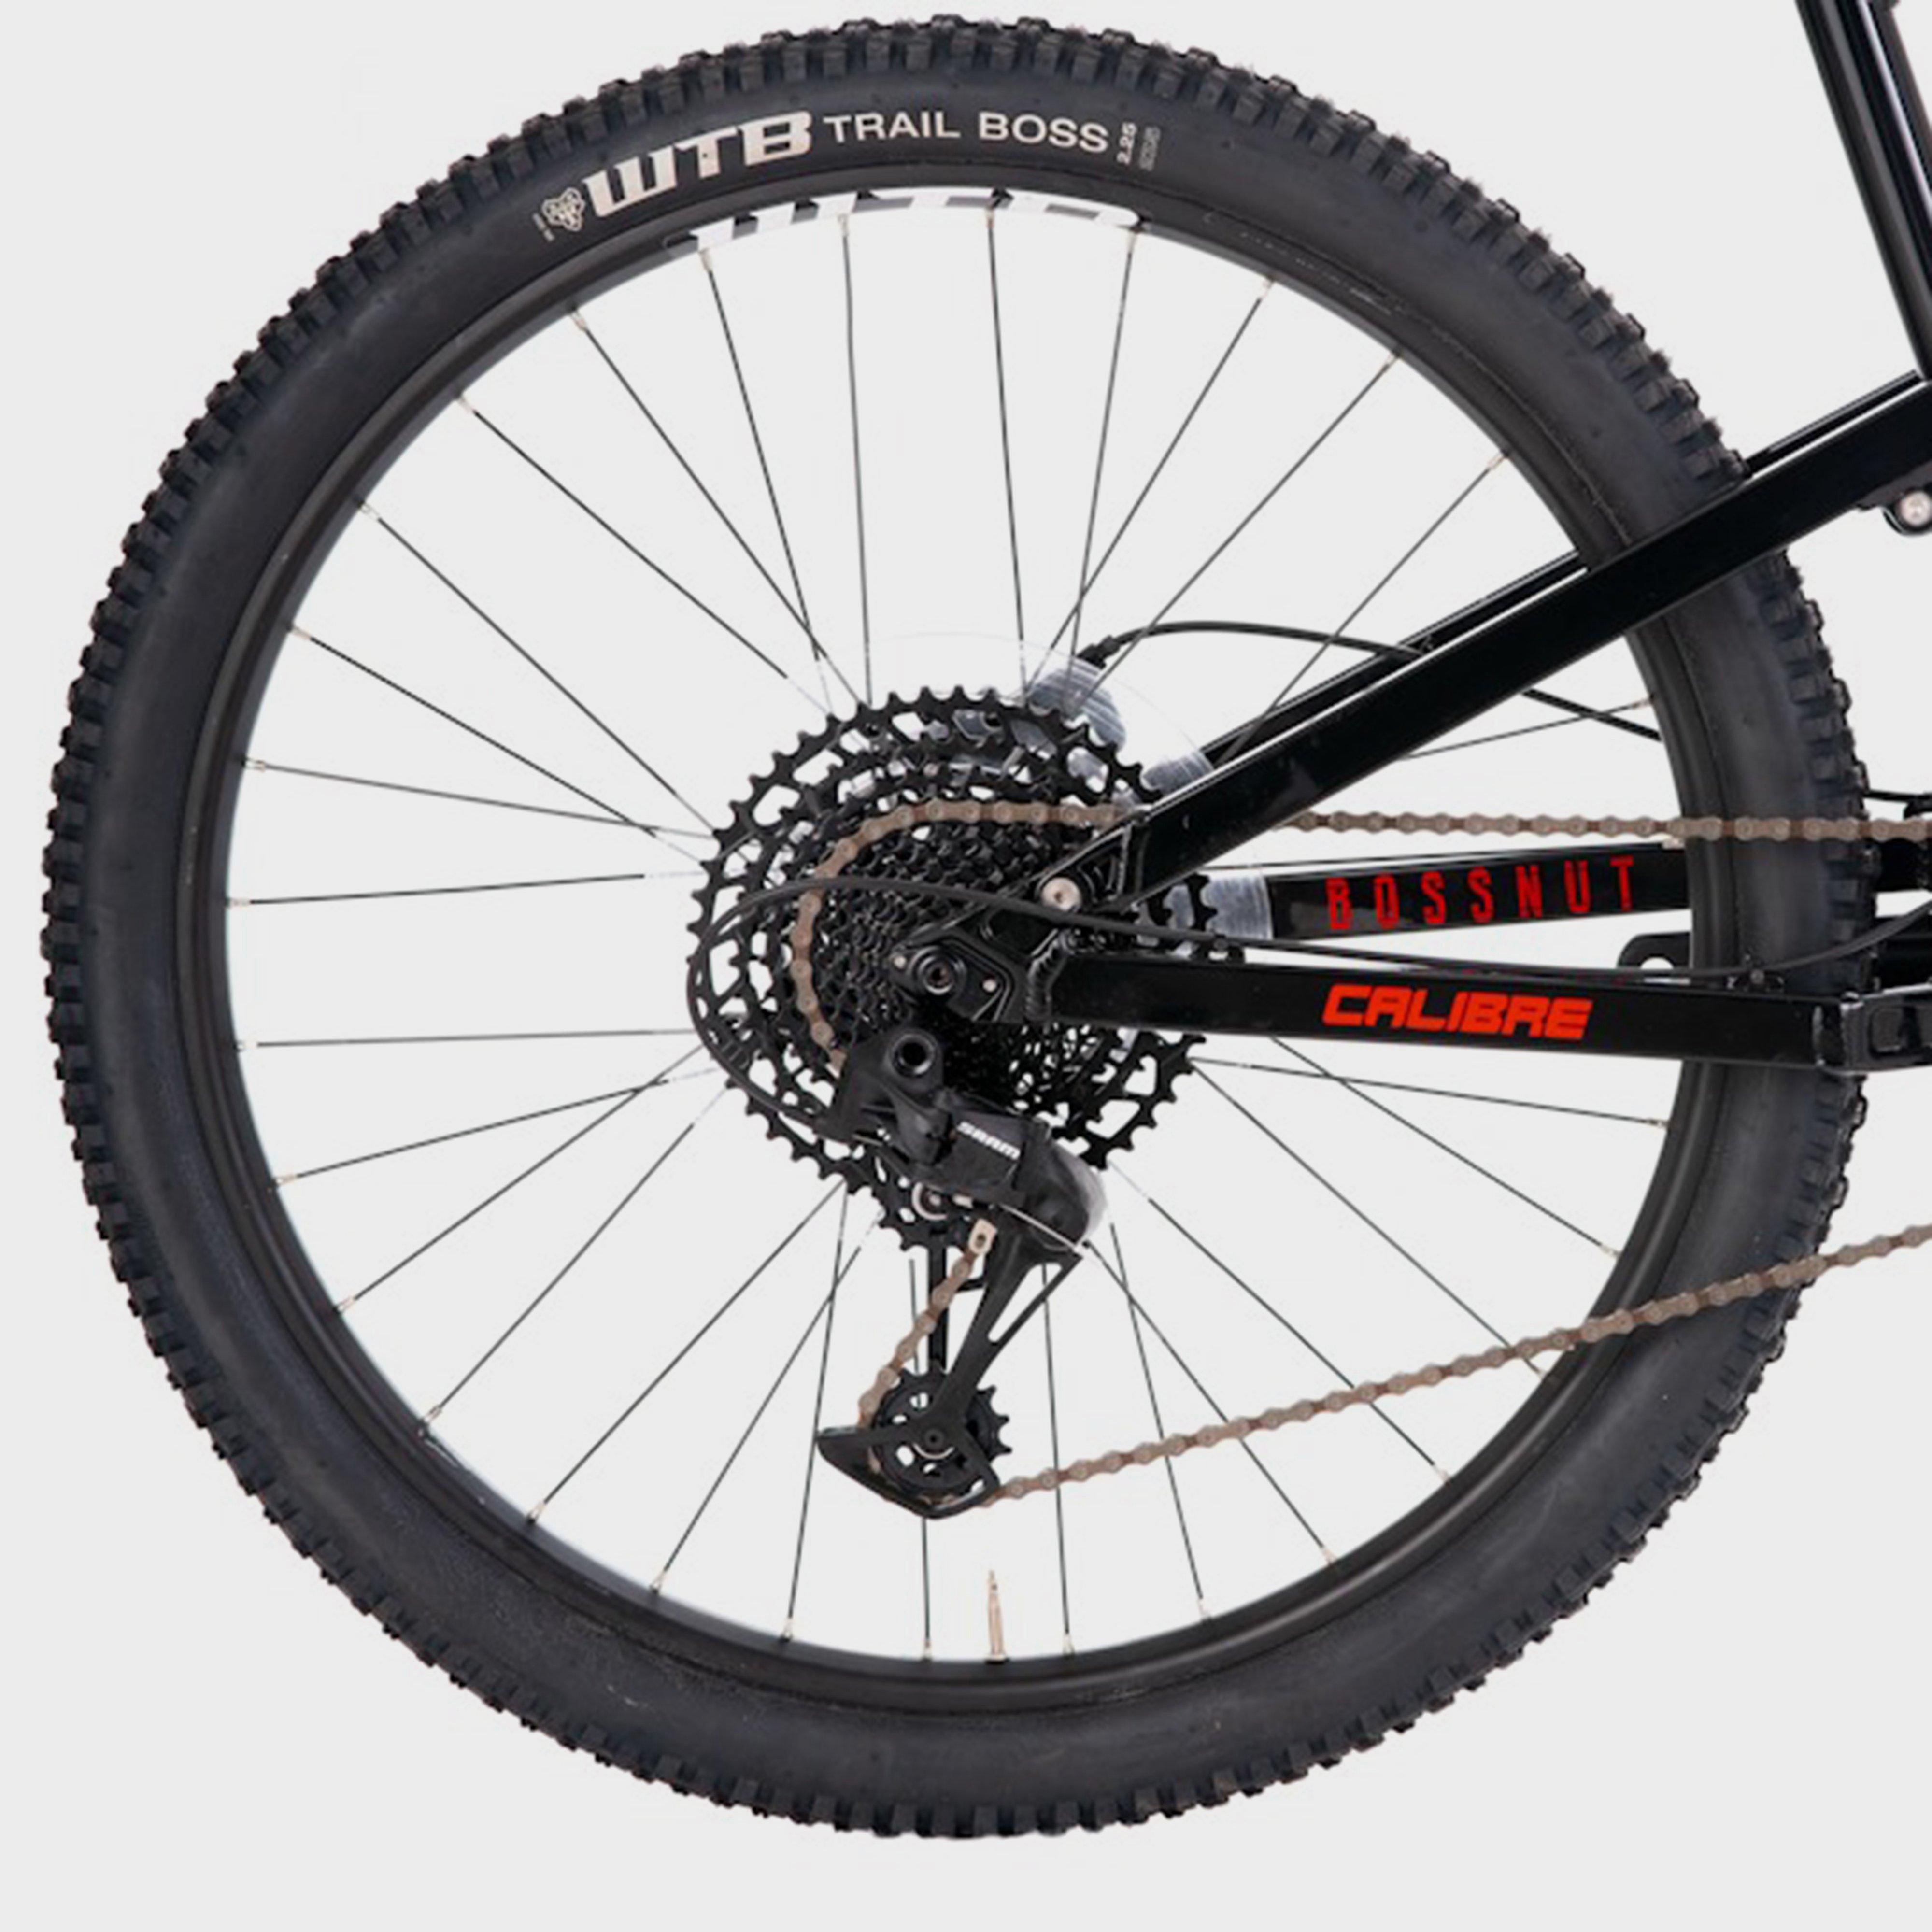 Calibre Bossnut Limited Edition Mountain Bike Review